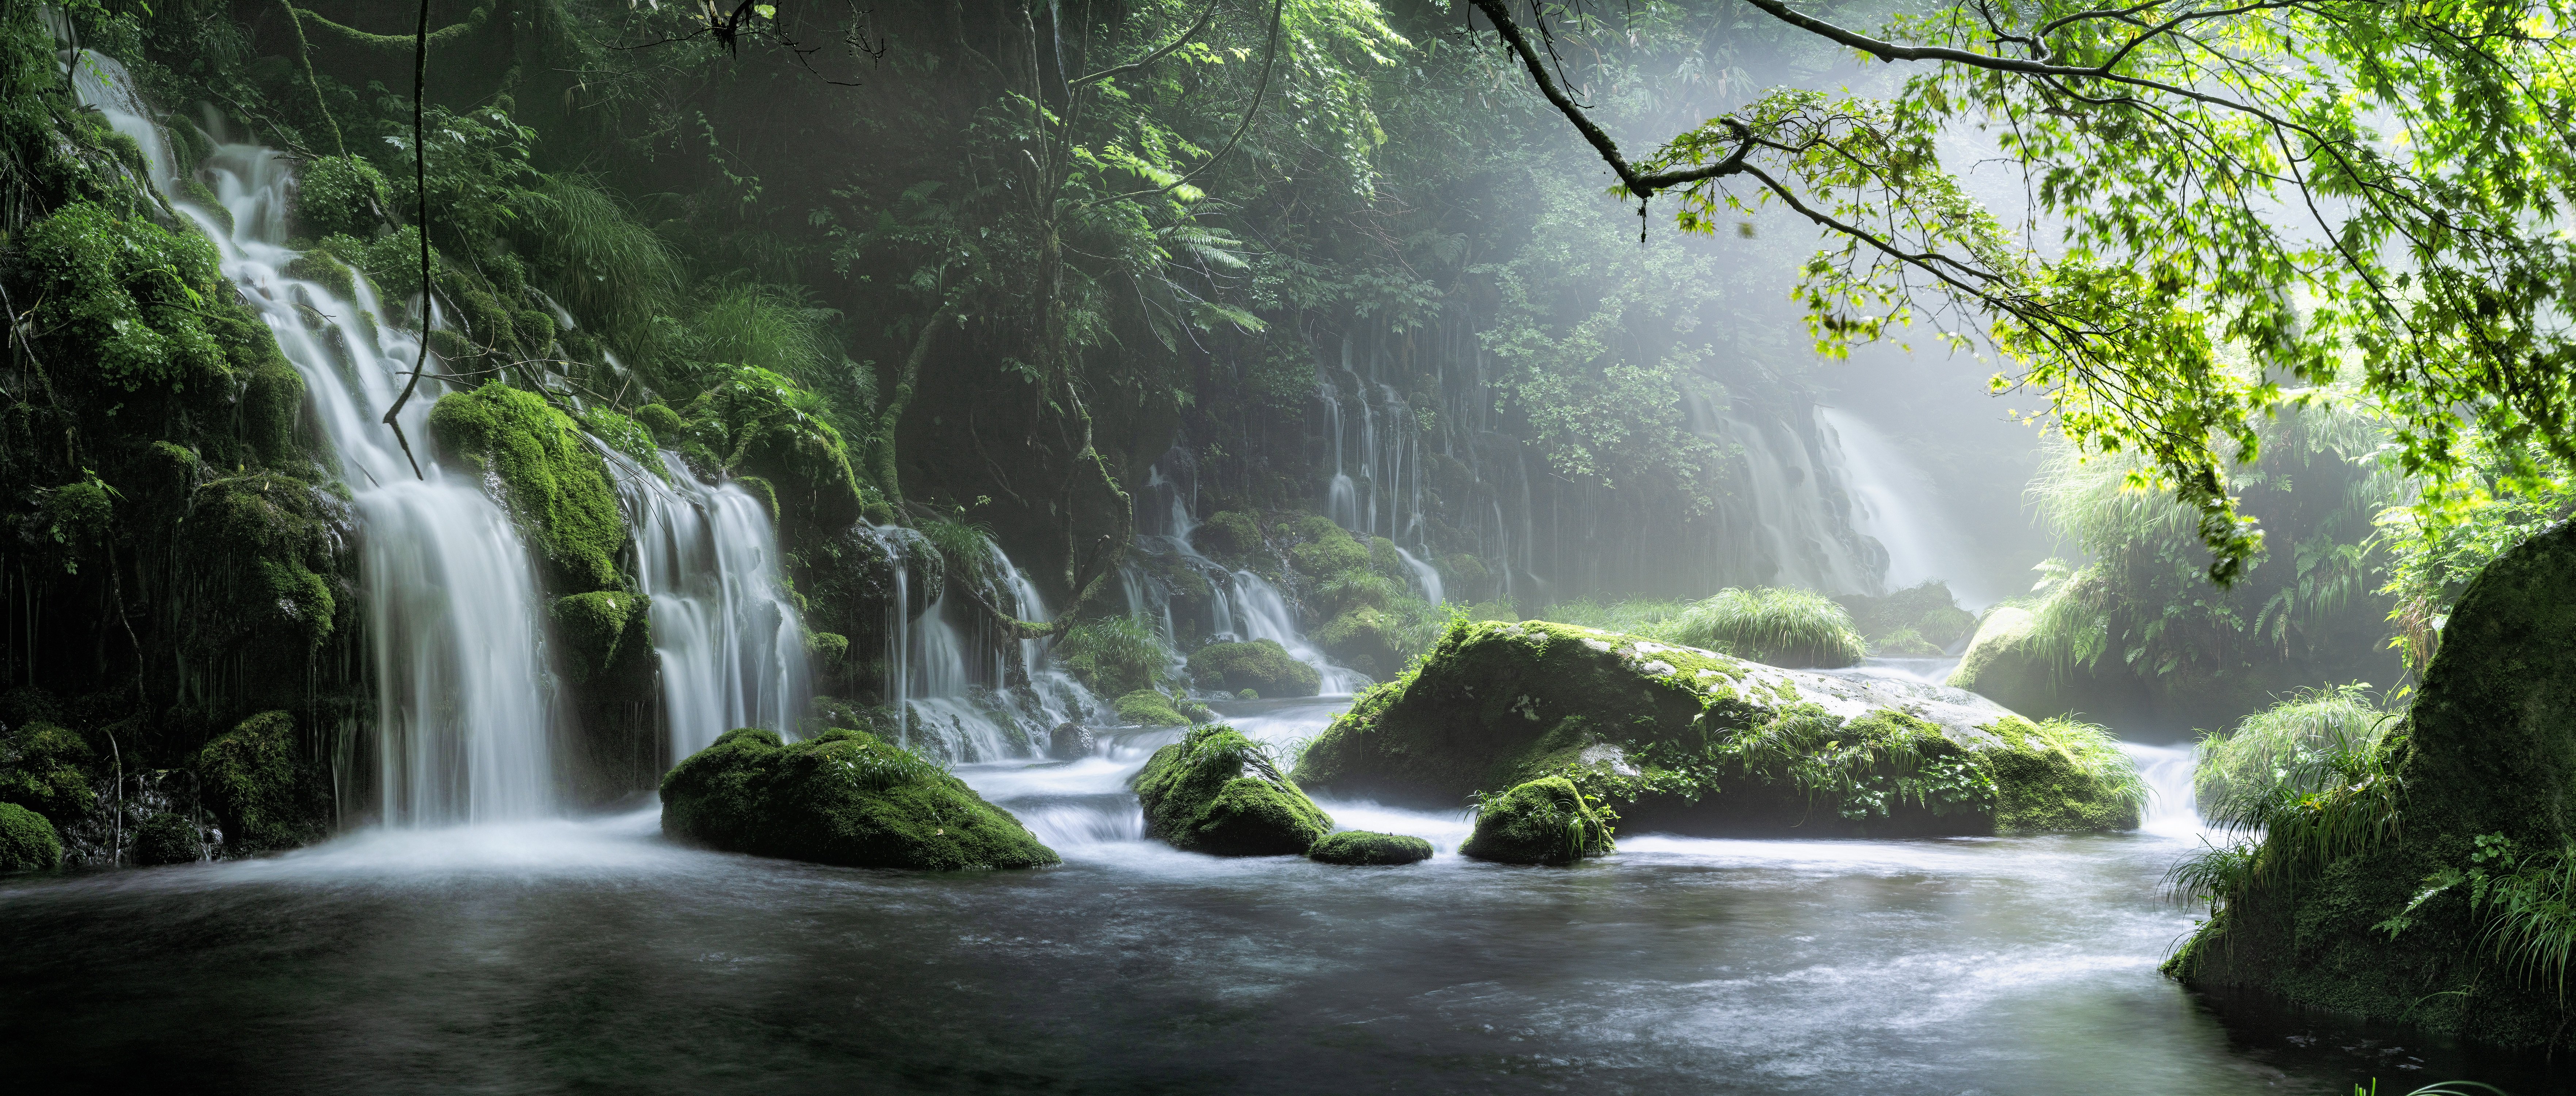 Spring Waterfall Stone Fog Mist Green Forest 8k, HD Nature, 4k Wallpaper, Image, Background, Photo and Picture